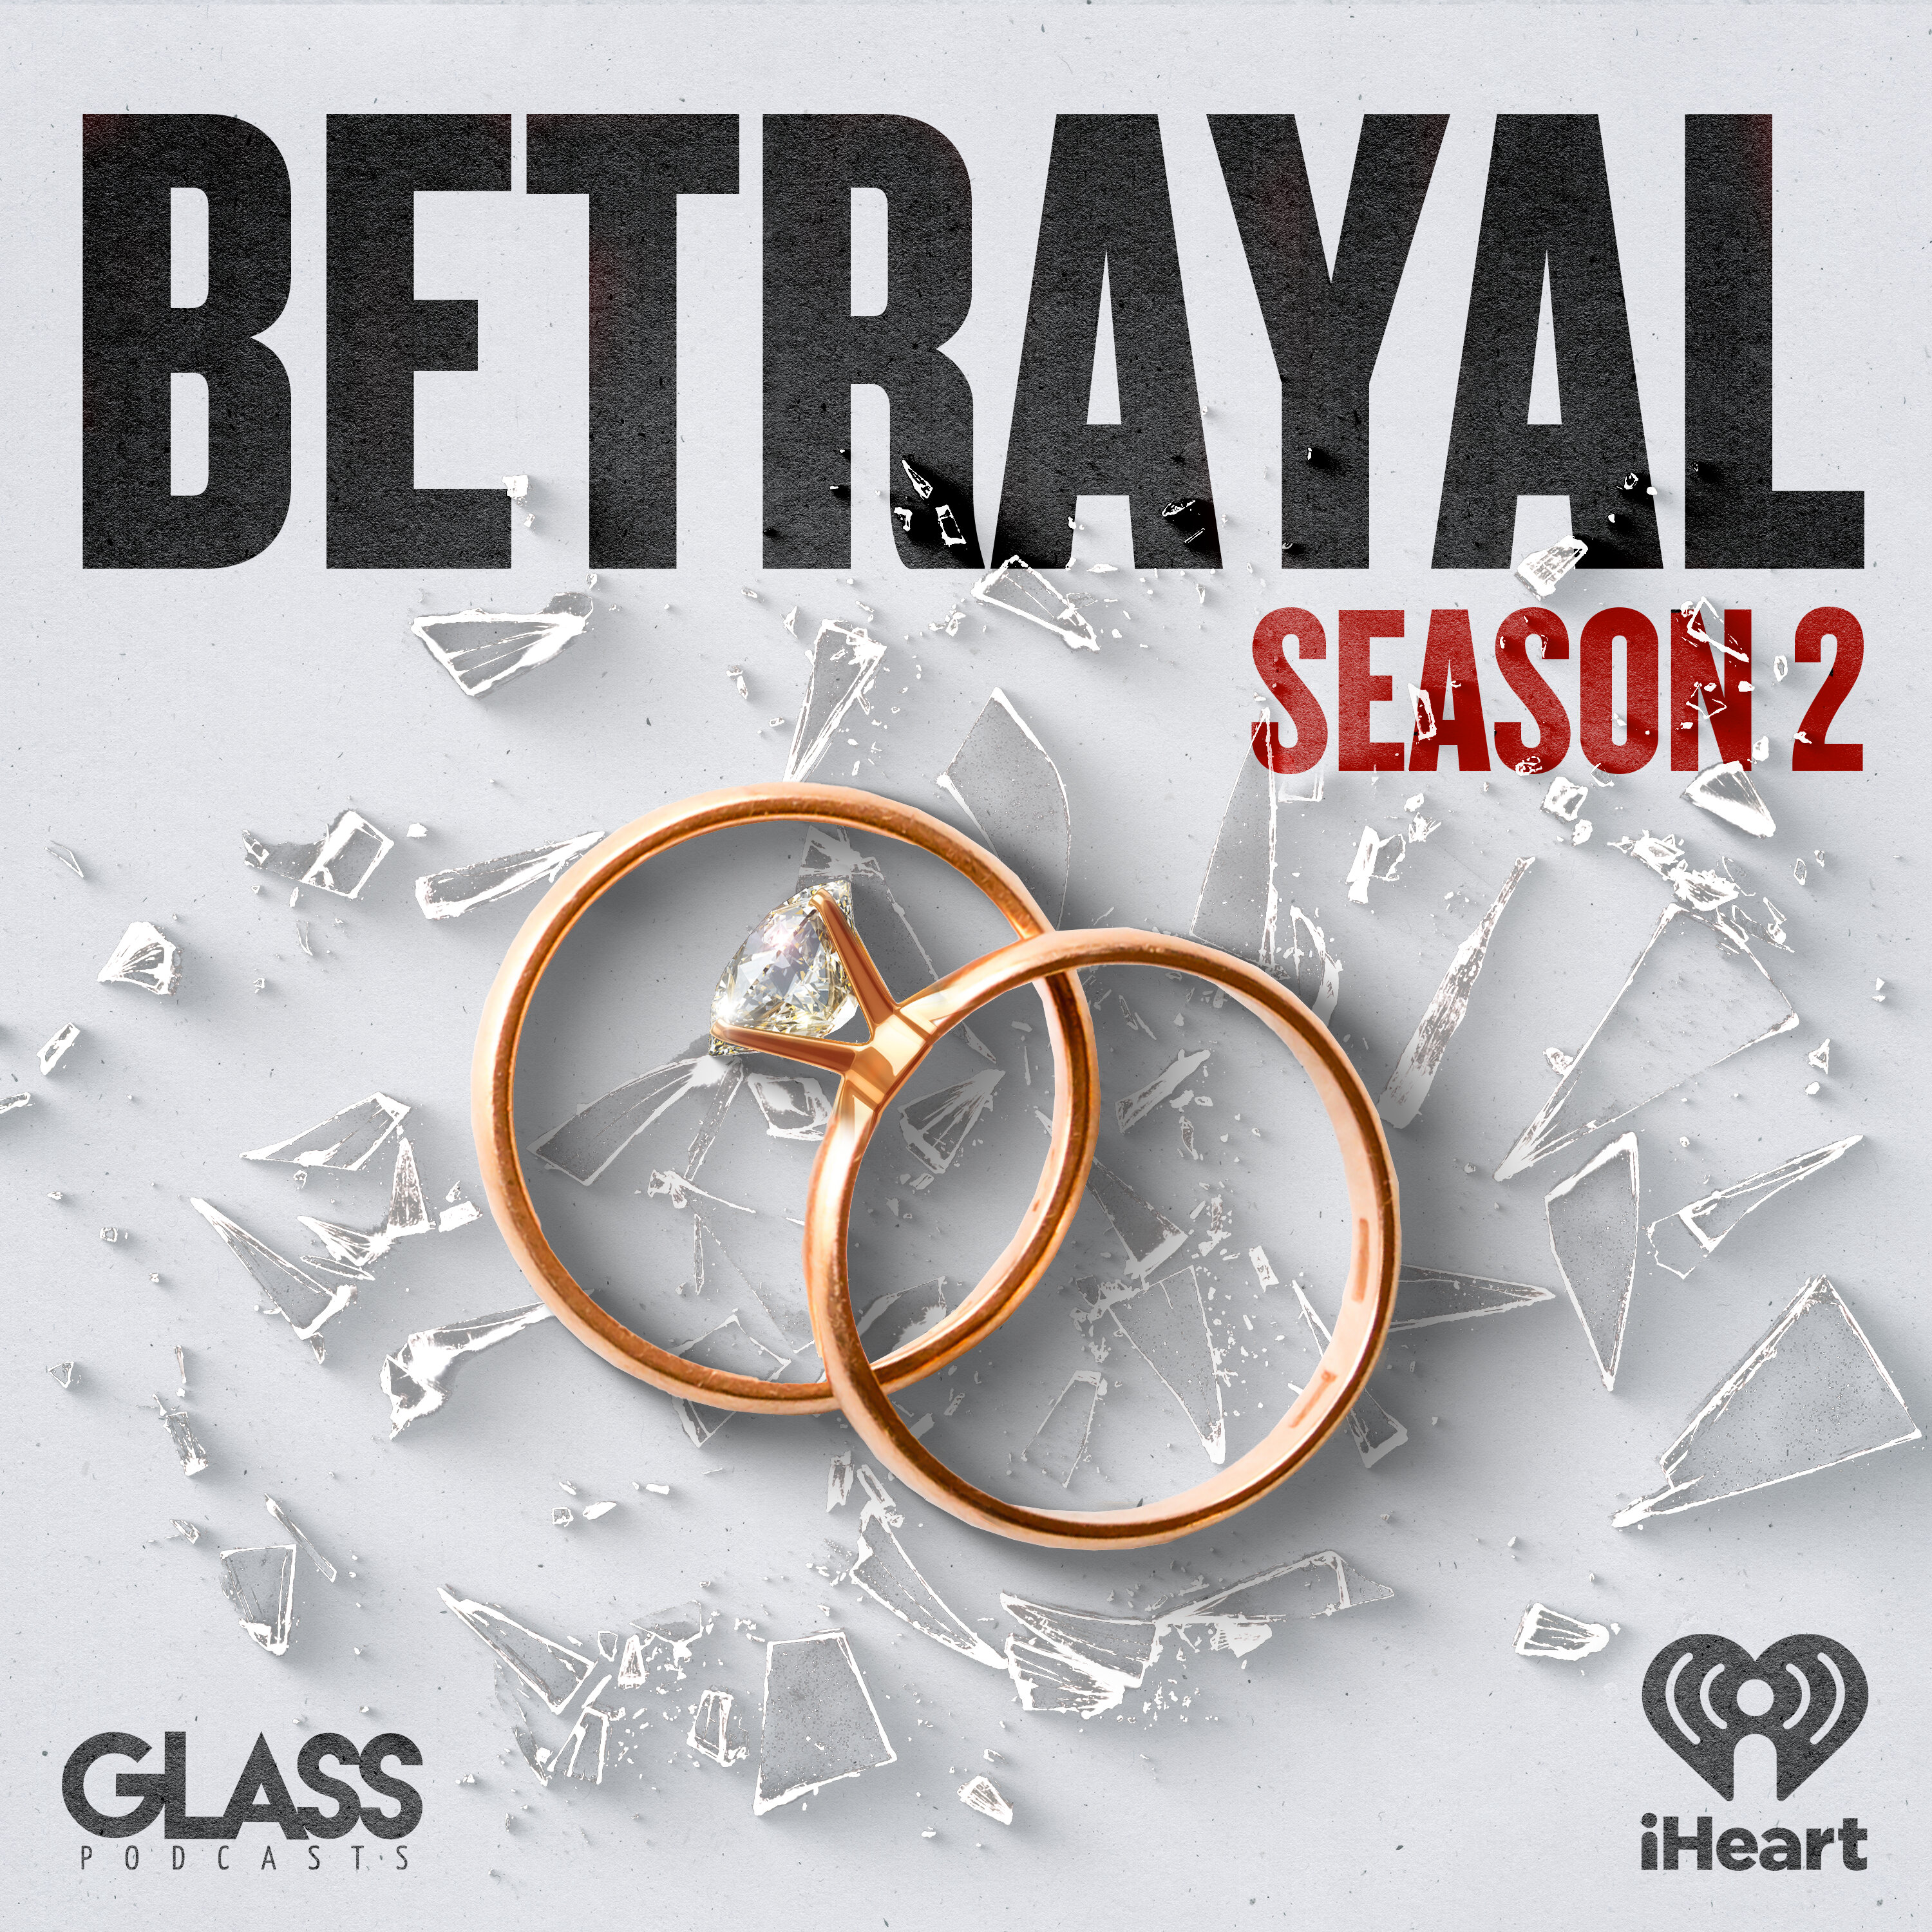 Betrayal by iHeartPodcasts and Glass Podcasts